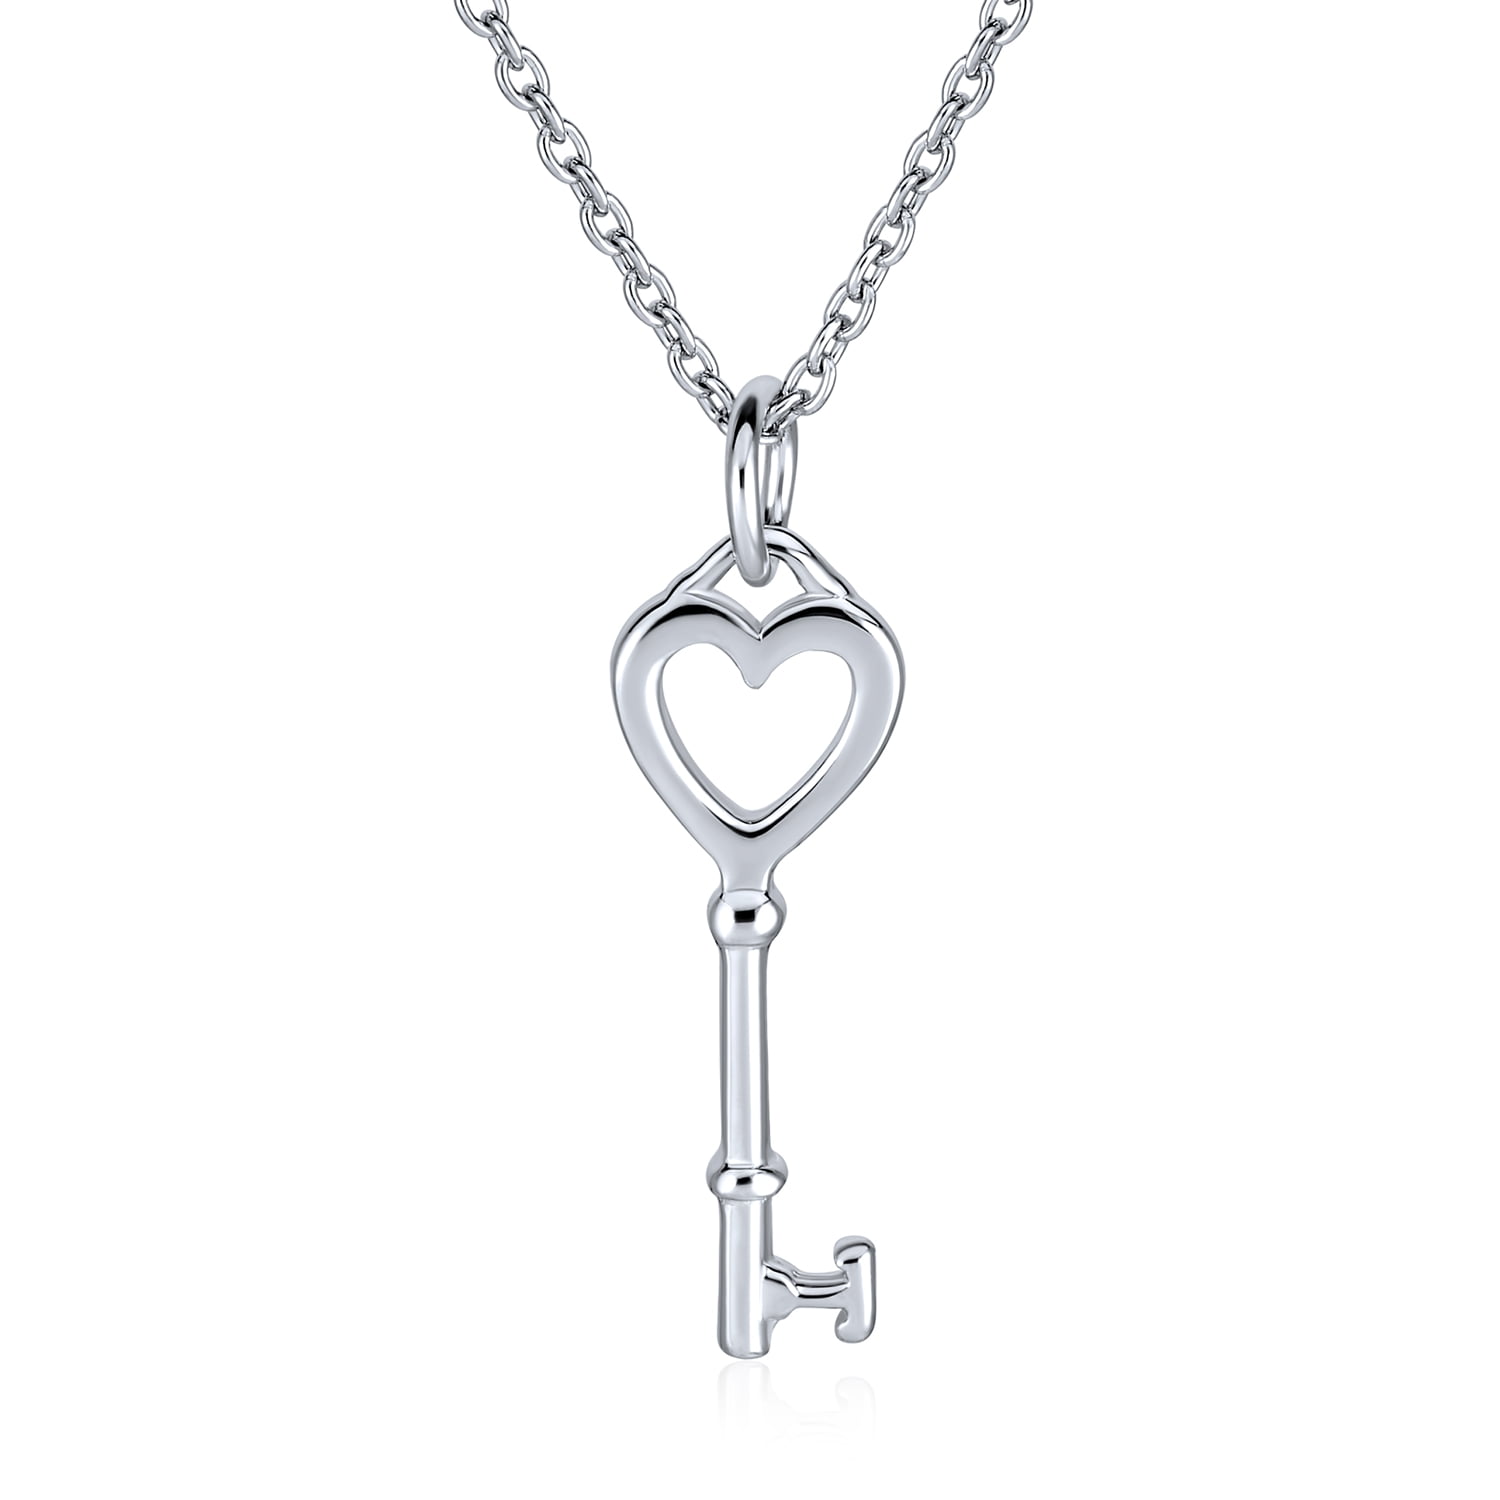 Silver Lock and Key Pendant Key To My Heart Necklace Free Shipping Handmade with All Sterling Silver